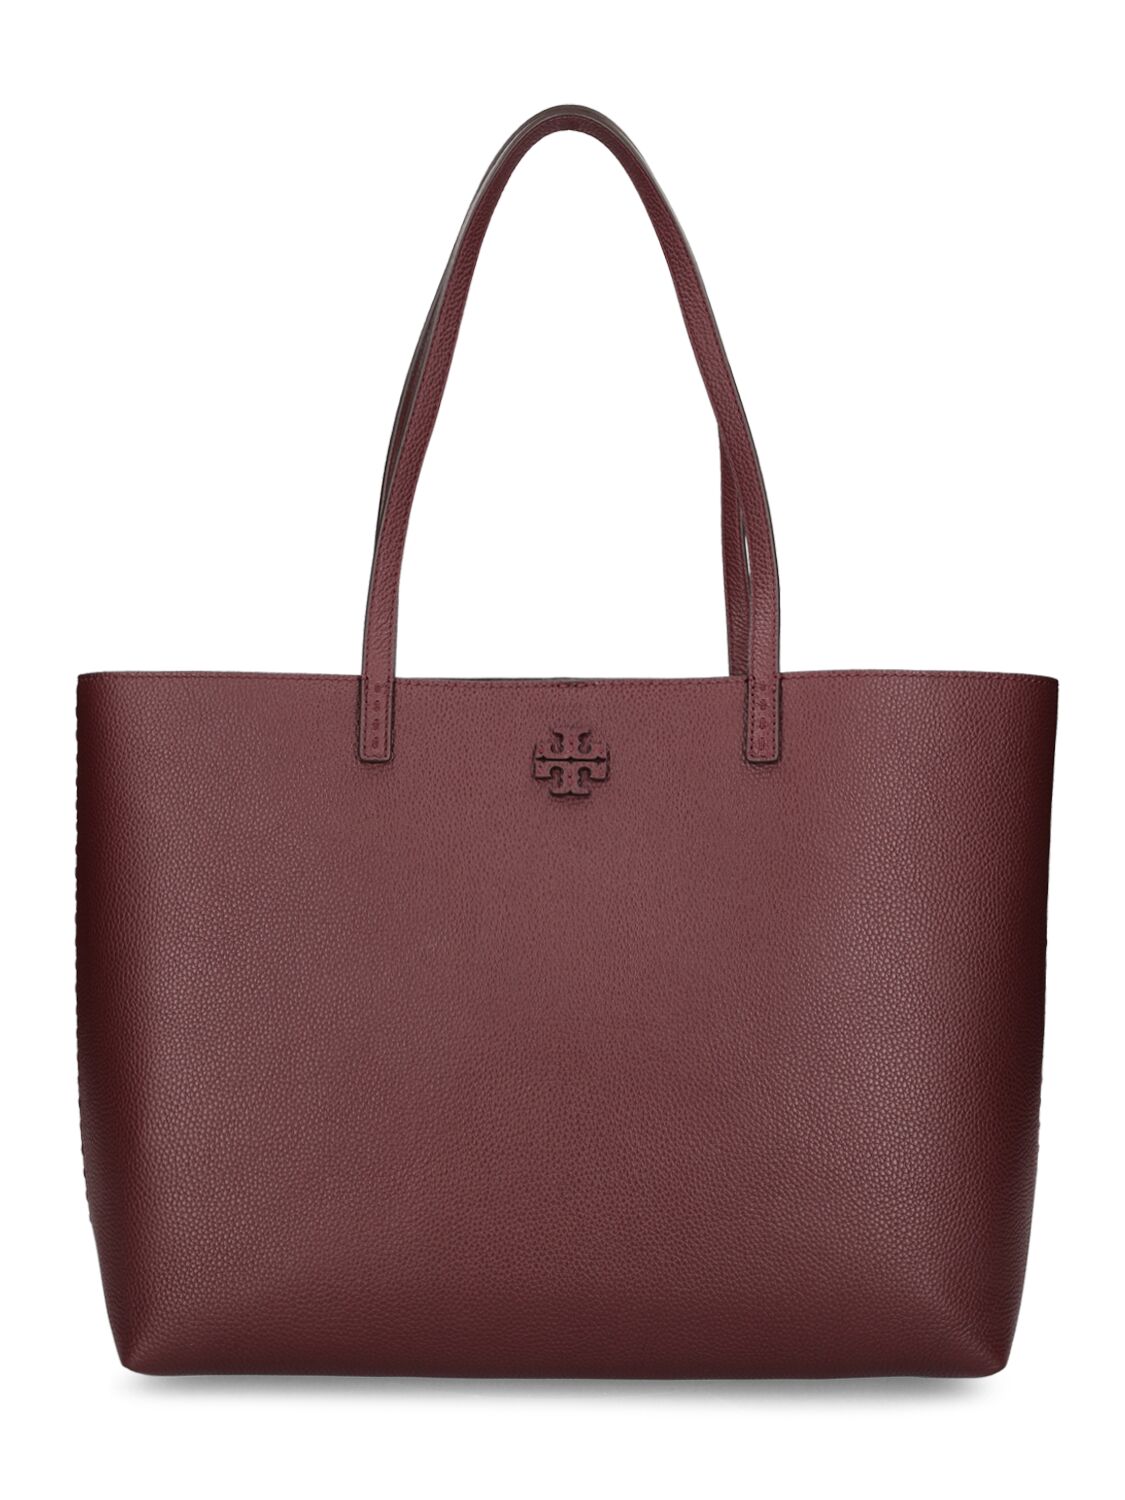 Tory Burch Mcgraw Leather Tote Bag In Bordeaux